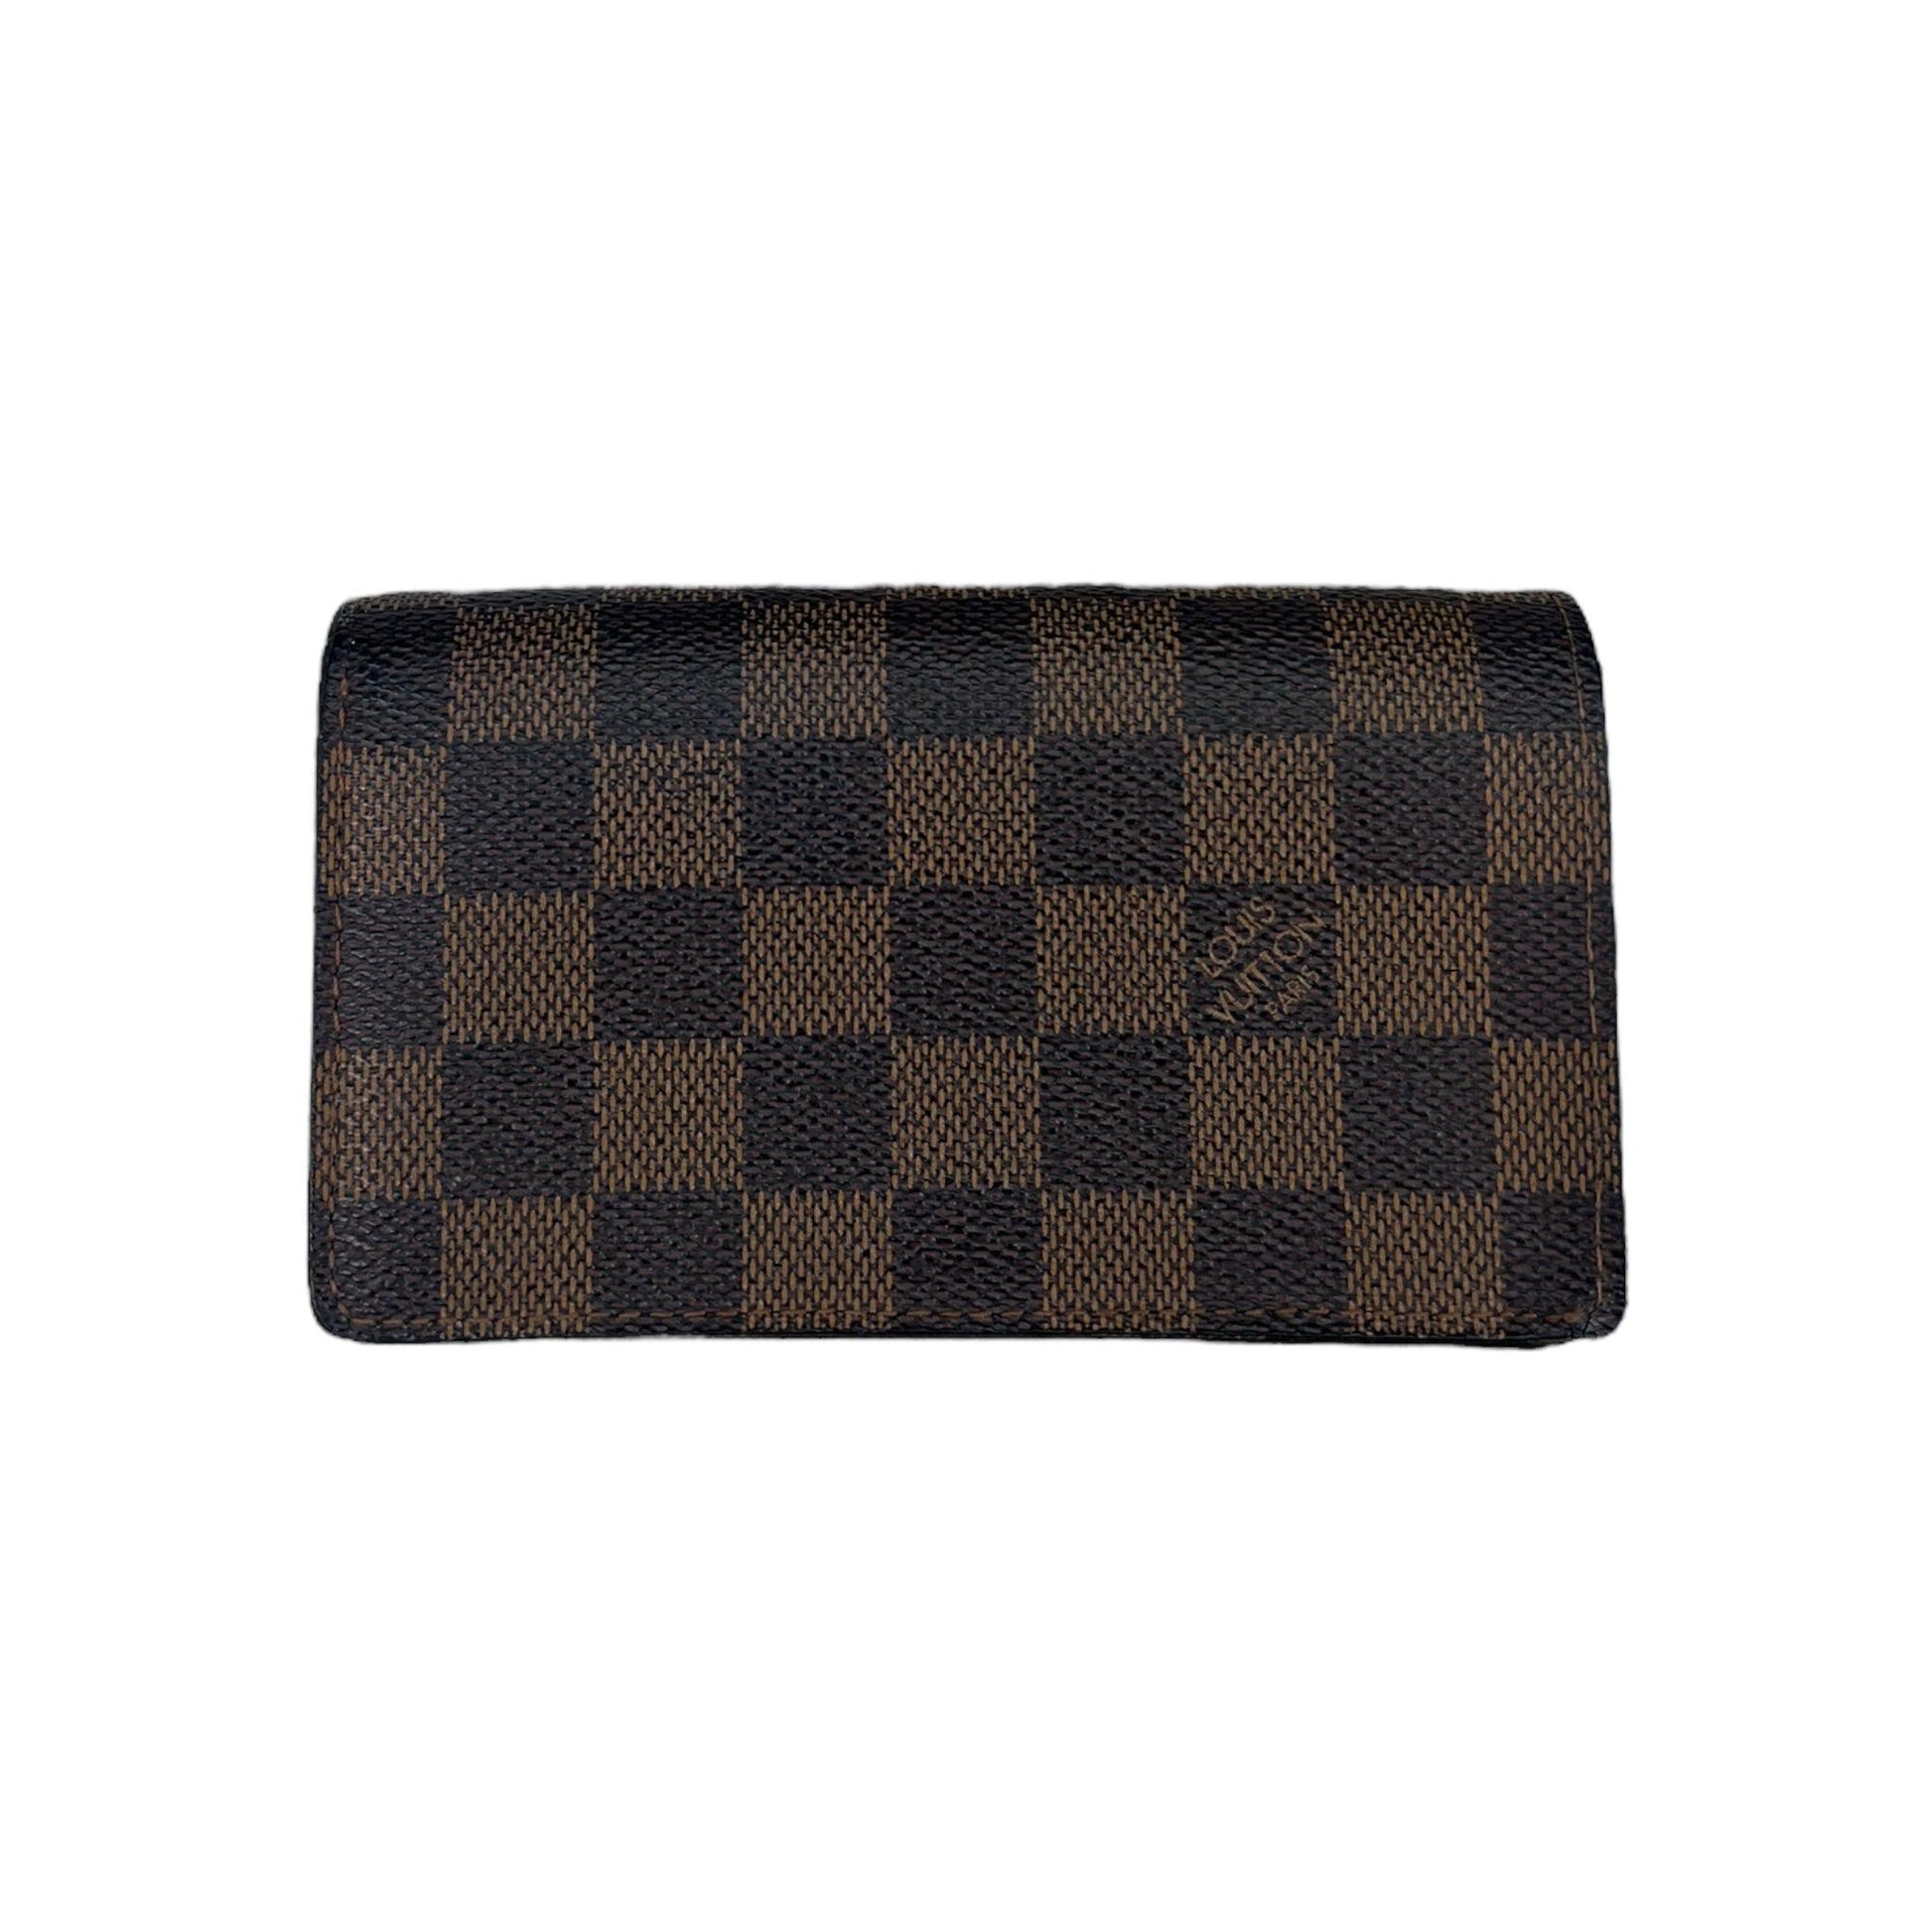 real louis vuitton wallets